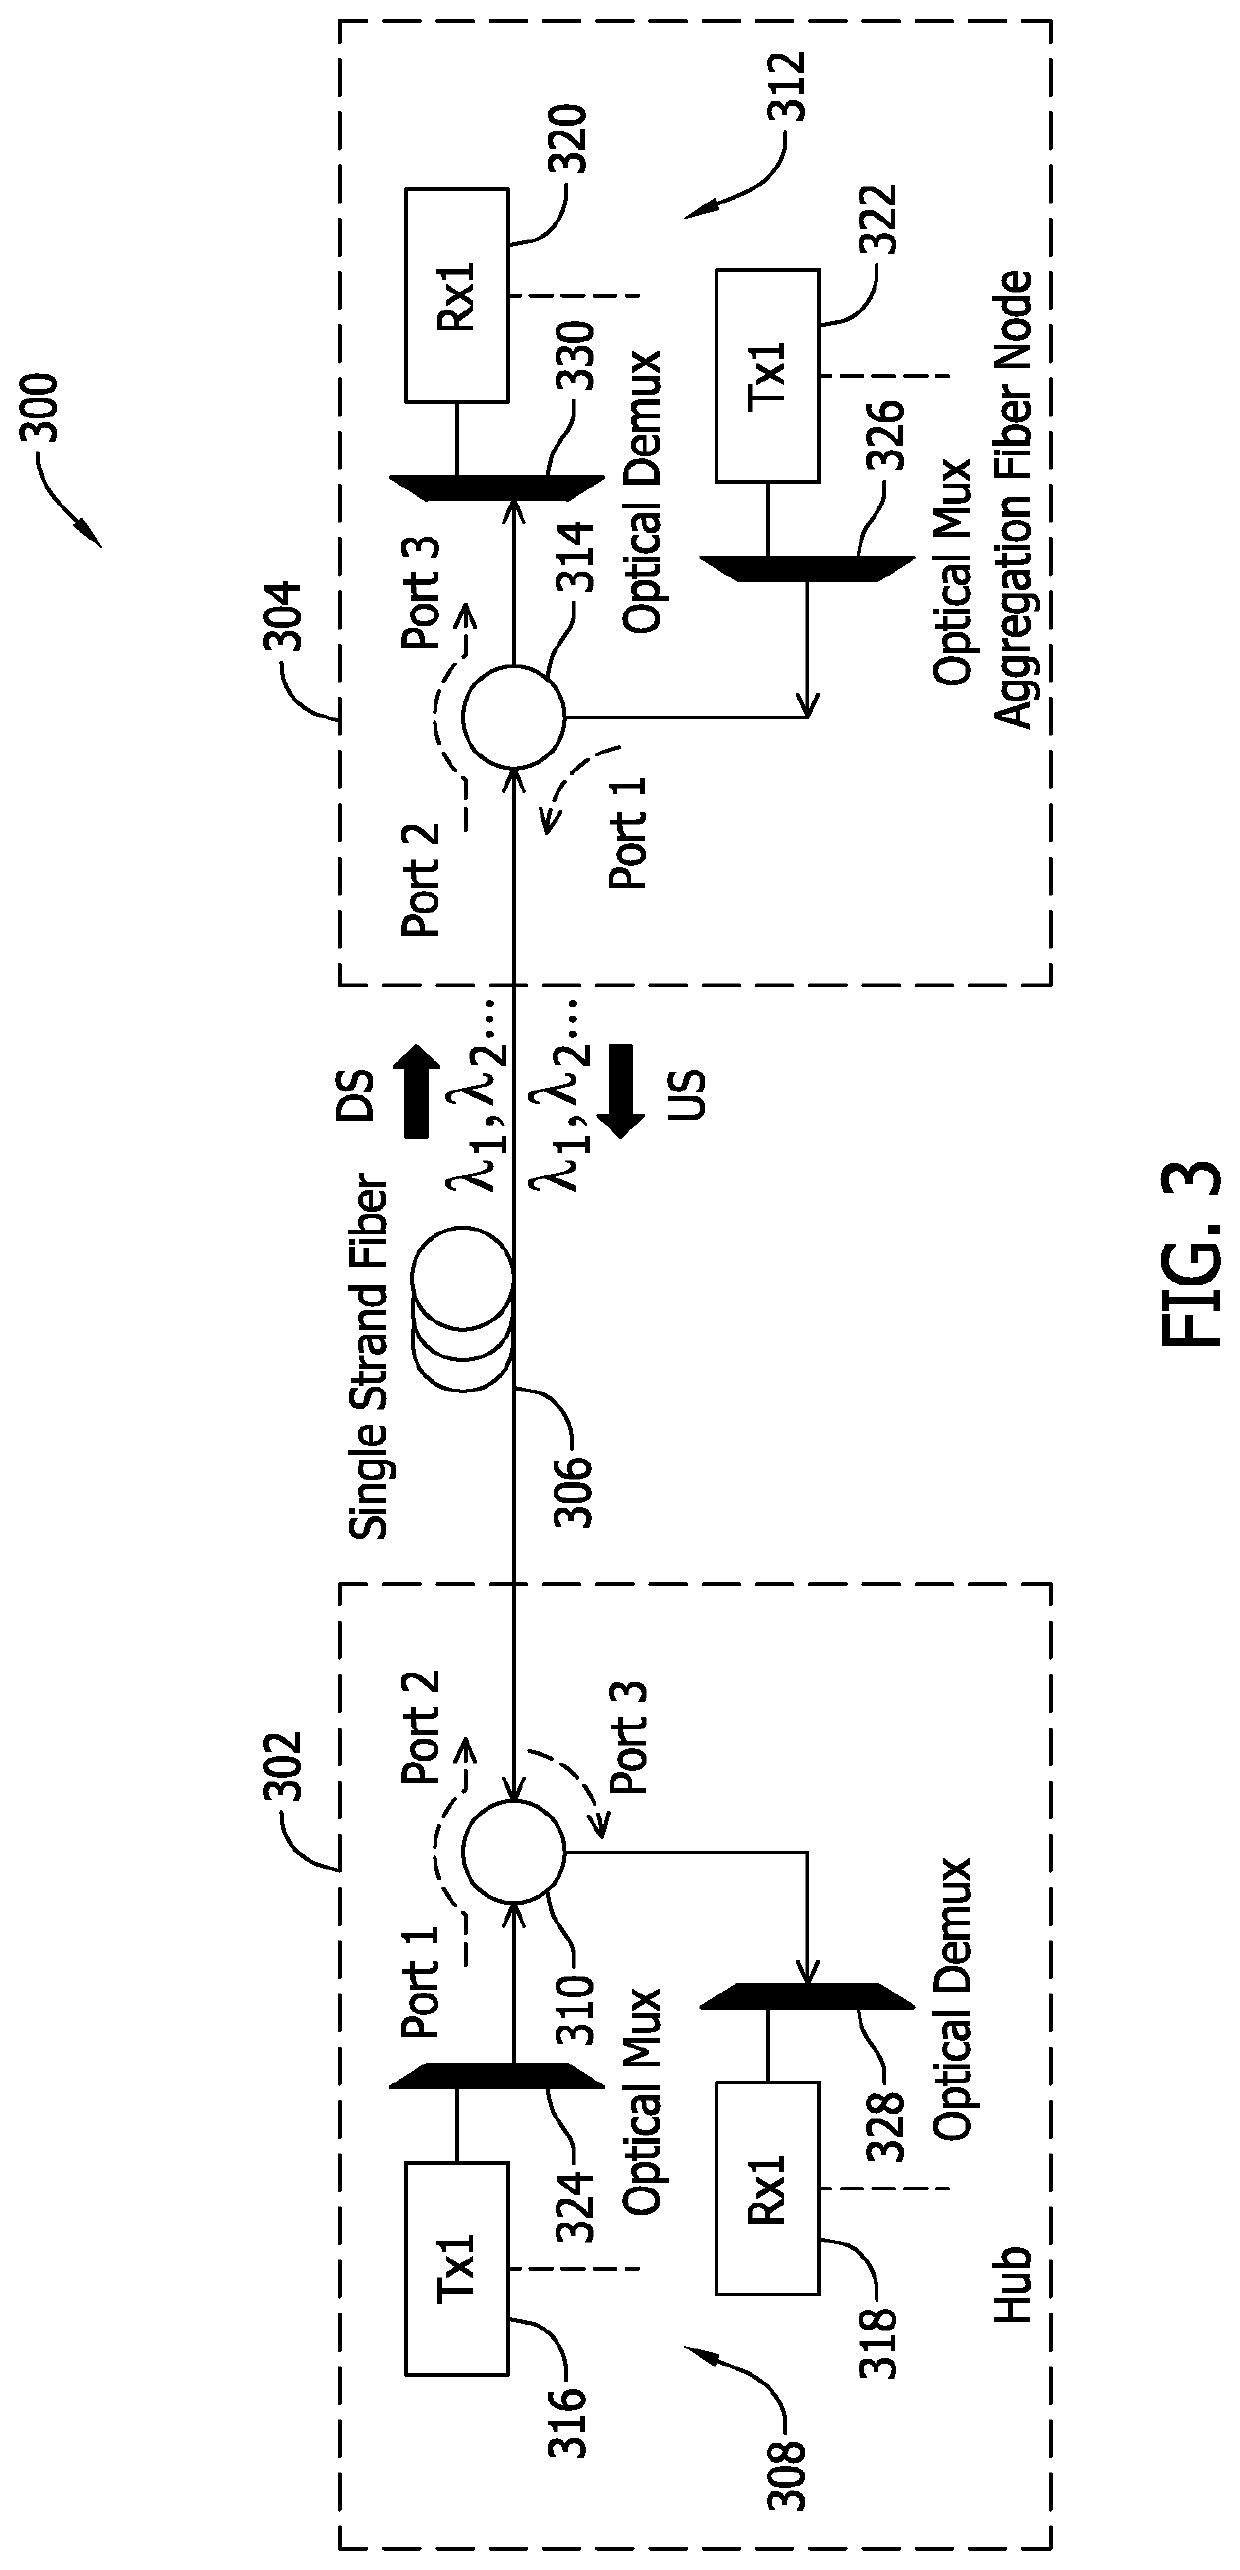 Systems and methods for full duplex coherent optics